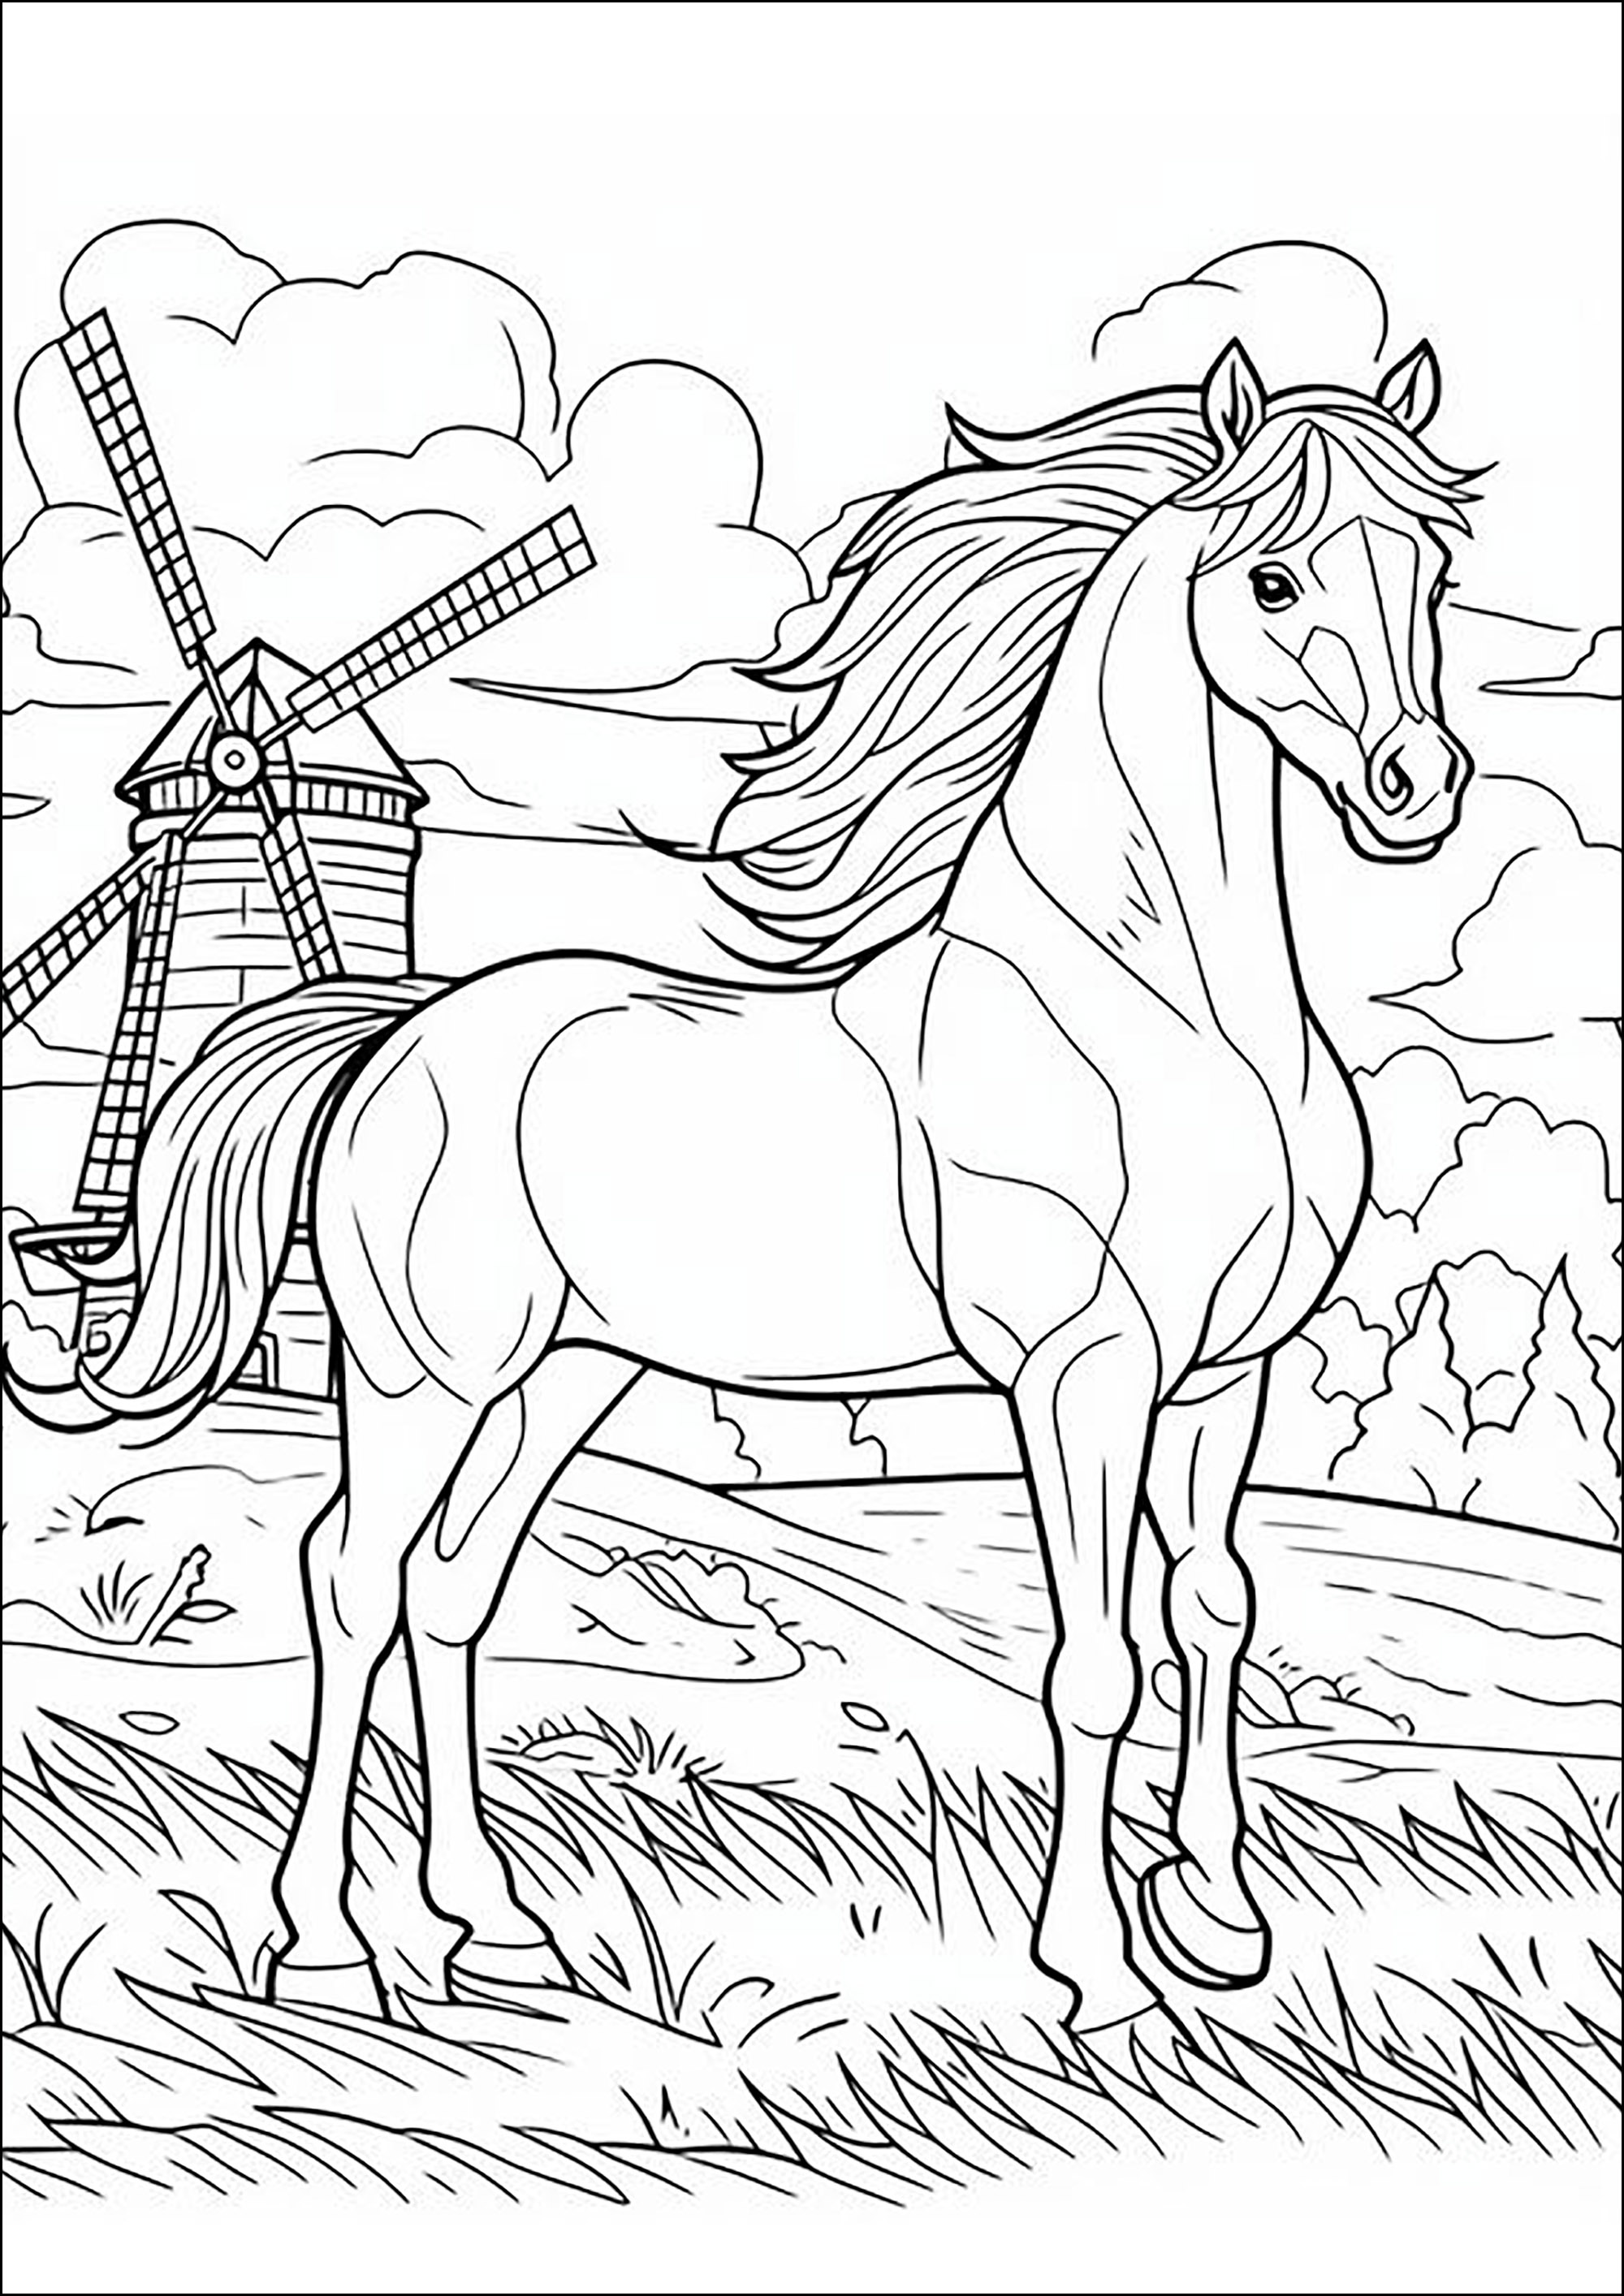 Horse with mane in the wind, with a windmill in the background. An inspiring coloring page